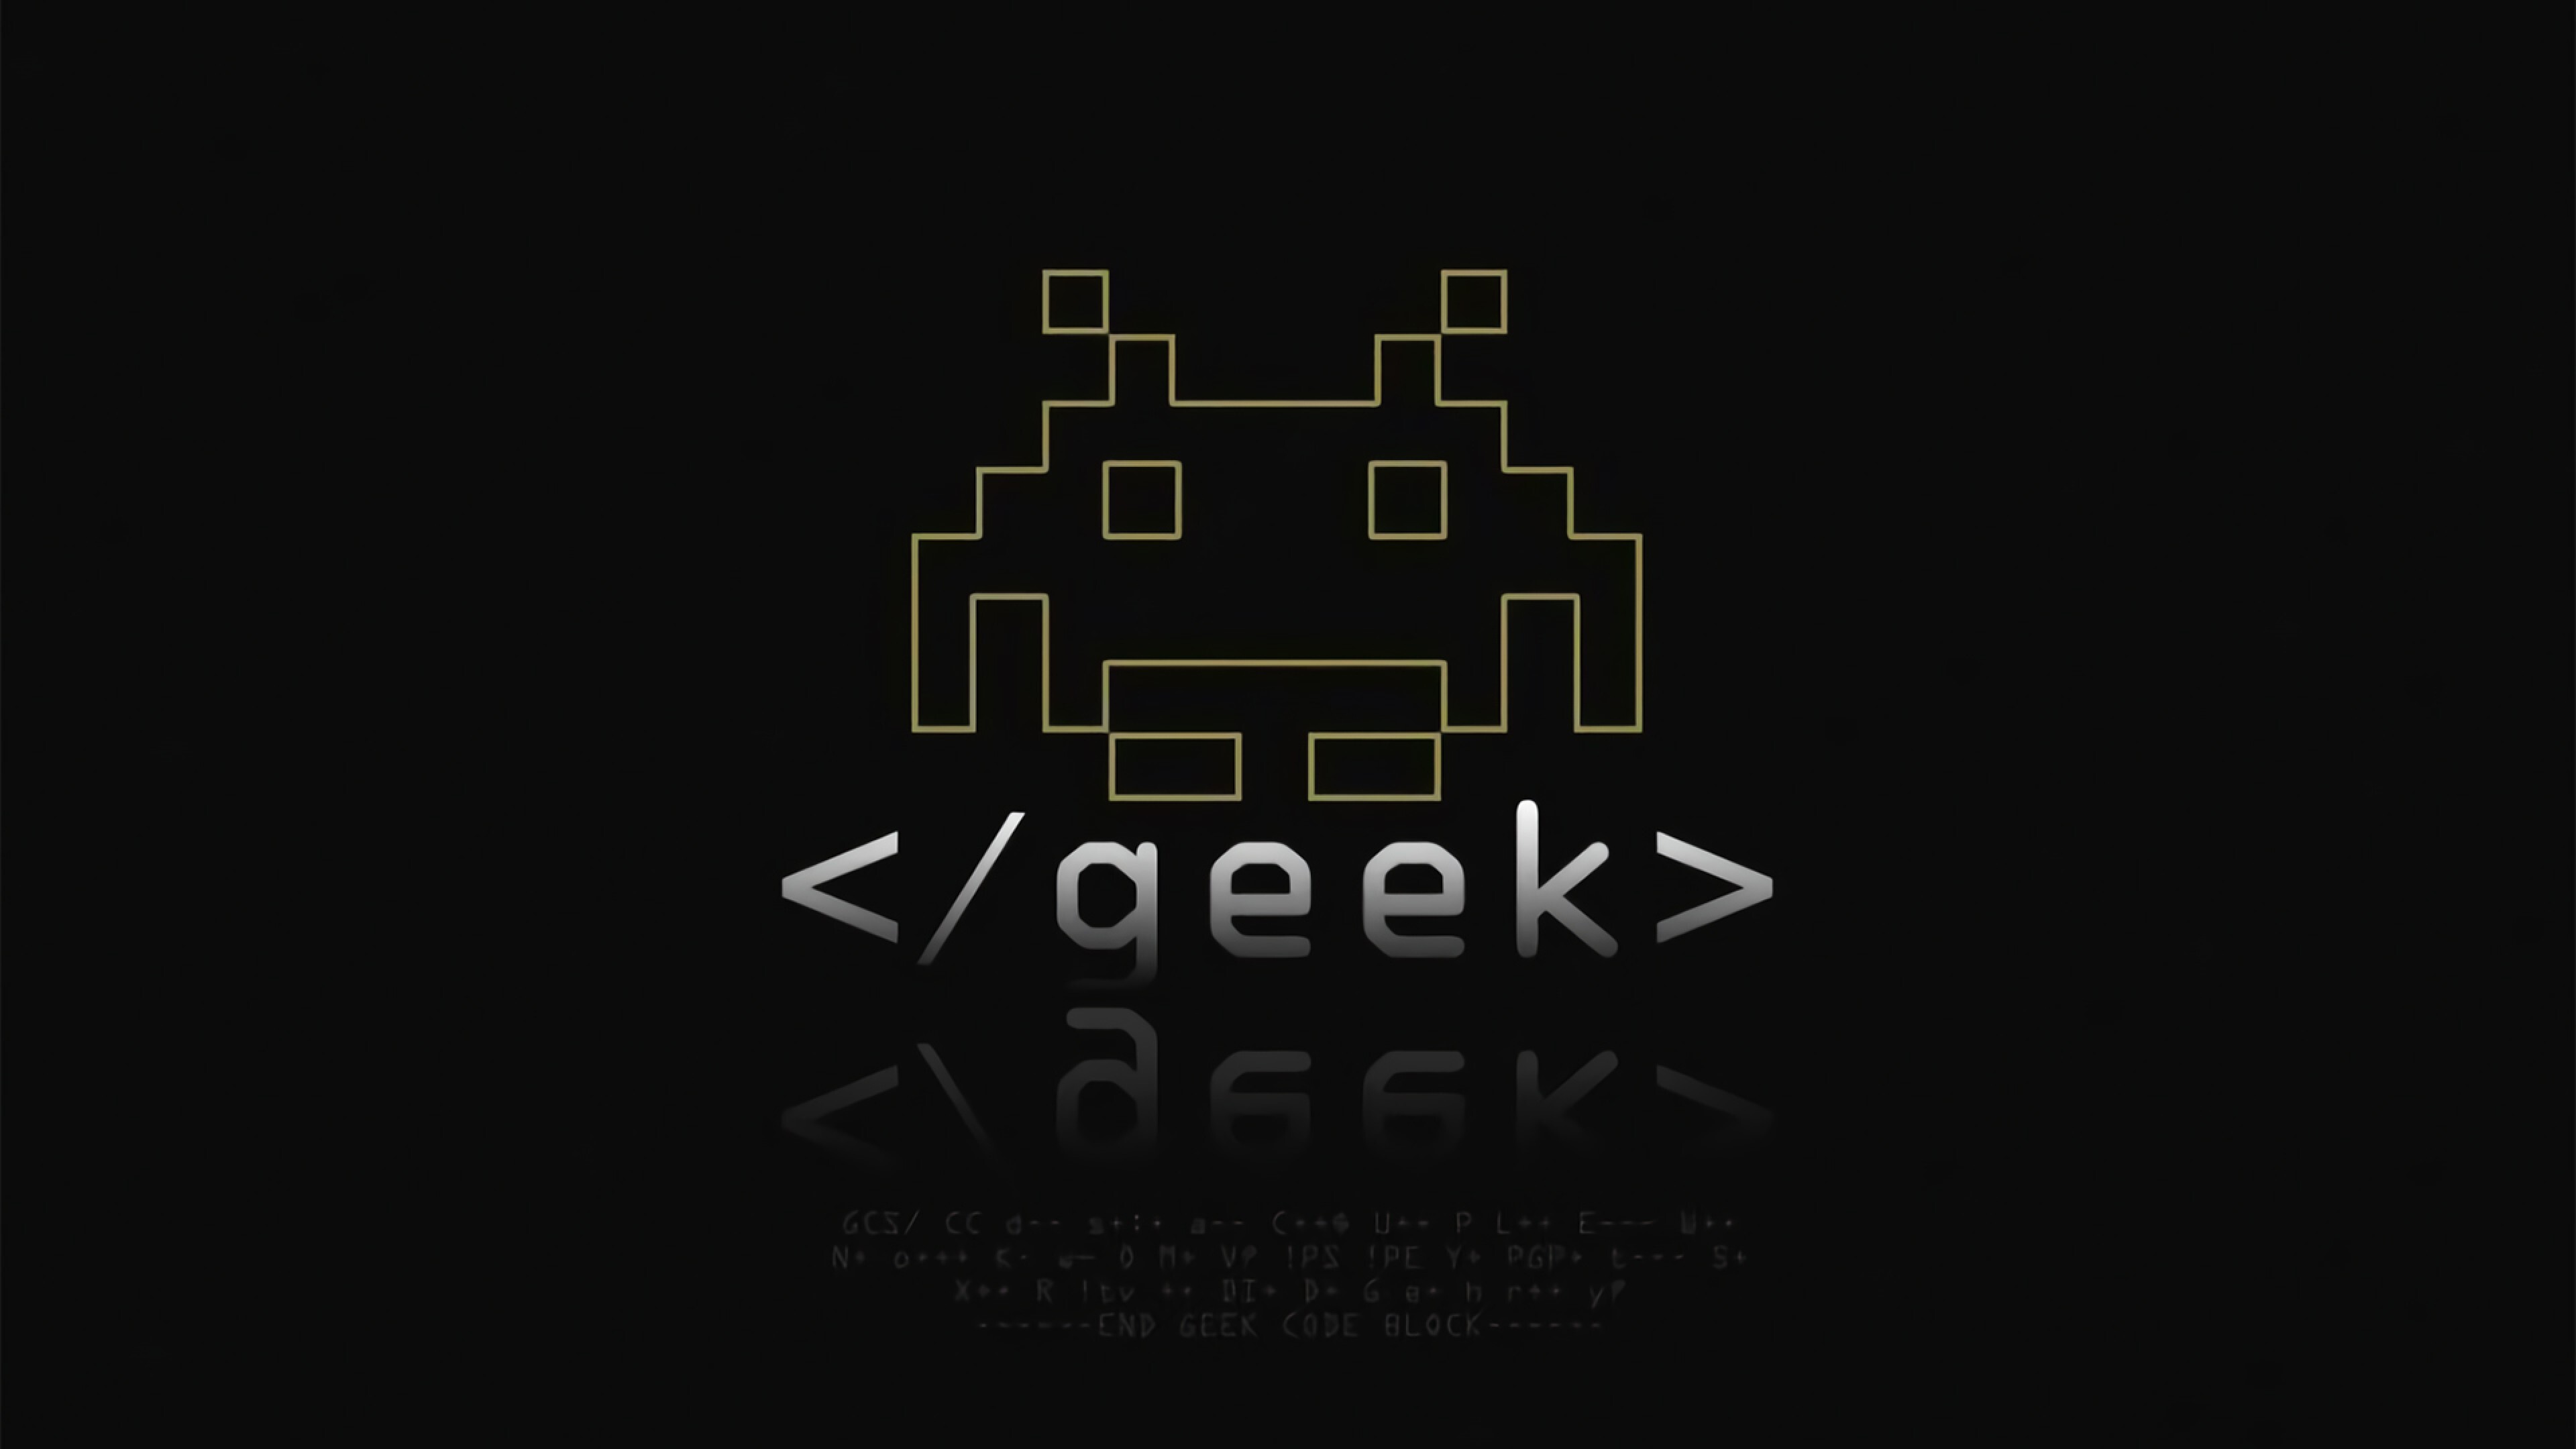 Geek: Space Invaders, Alien, Obscure programming language, Classical arcade games. 3840x2160 4K Background.